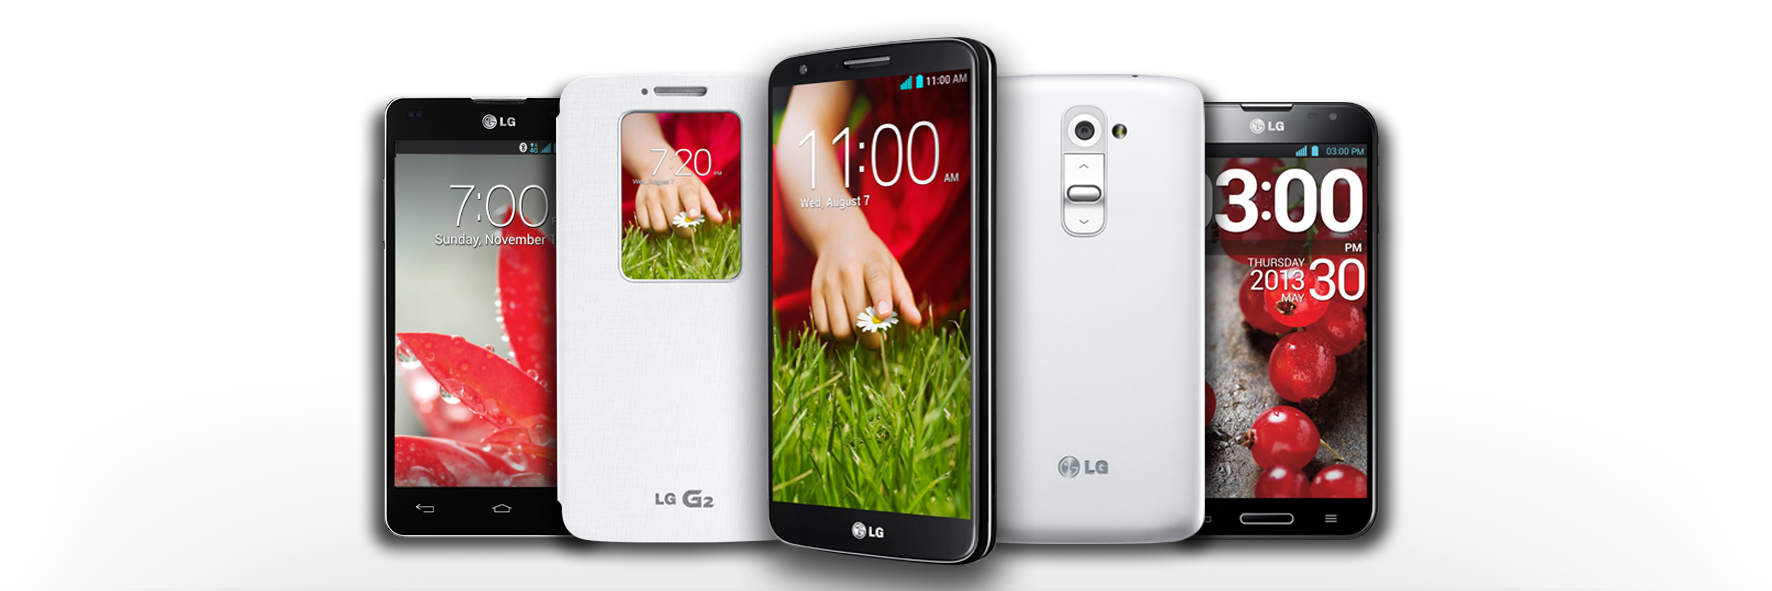 Need-a-Short-Term-Access-to-an-Android-Phone-to-Test-Your-App-LG-Has-You-Covered-with-New-Loaner-Program